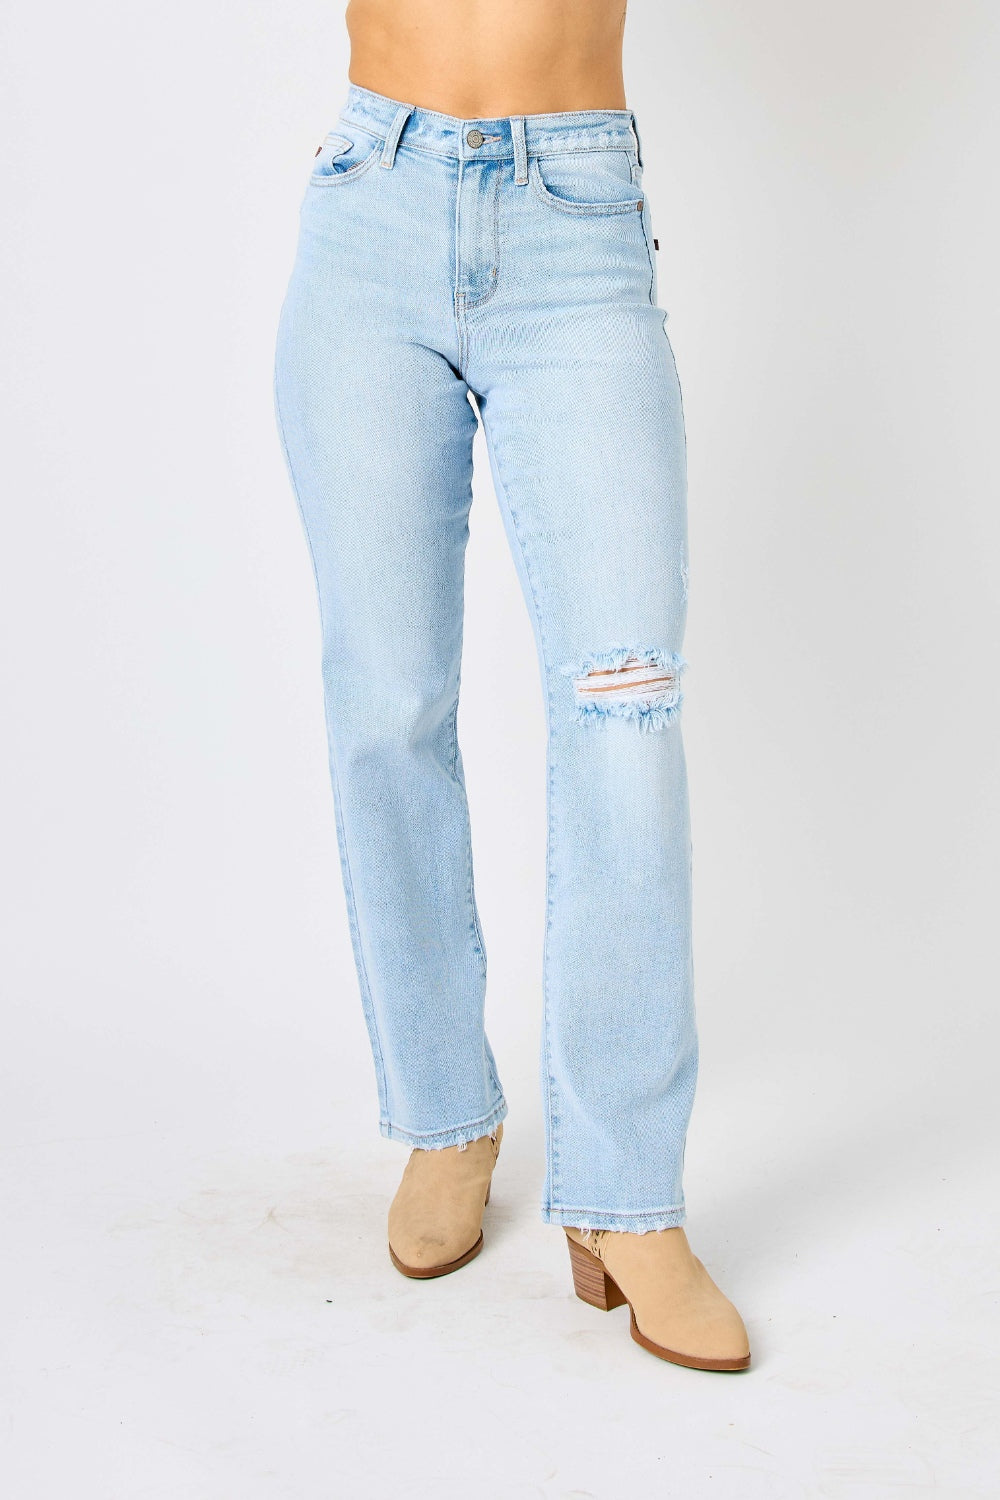 Judy Blue Full Size High Waist Distressed Straight Jeans-Denim-Inspired by Justeen-Women's Clothing Boutique